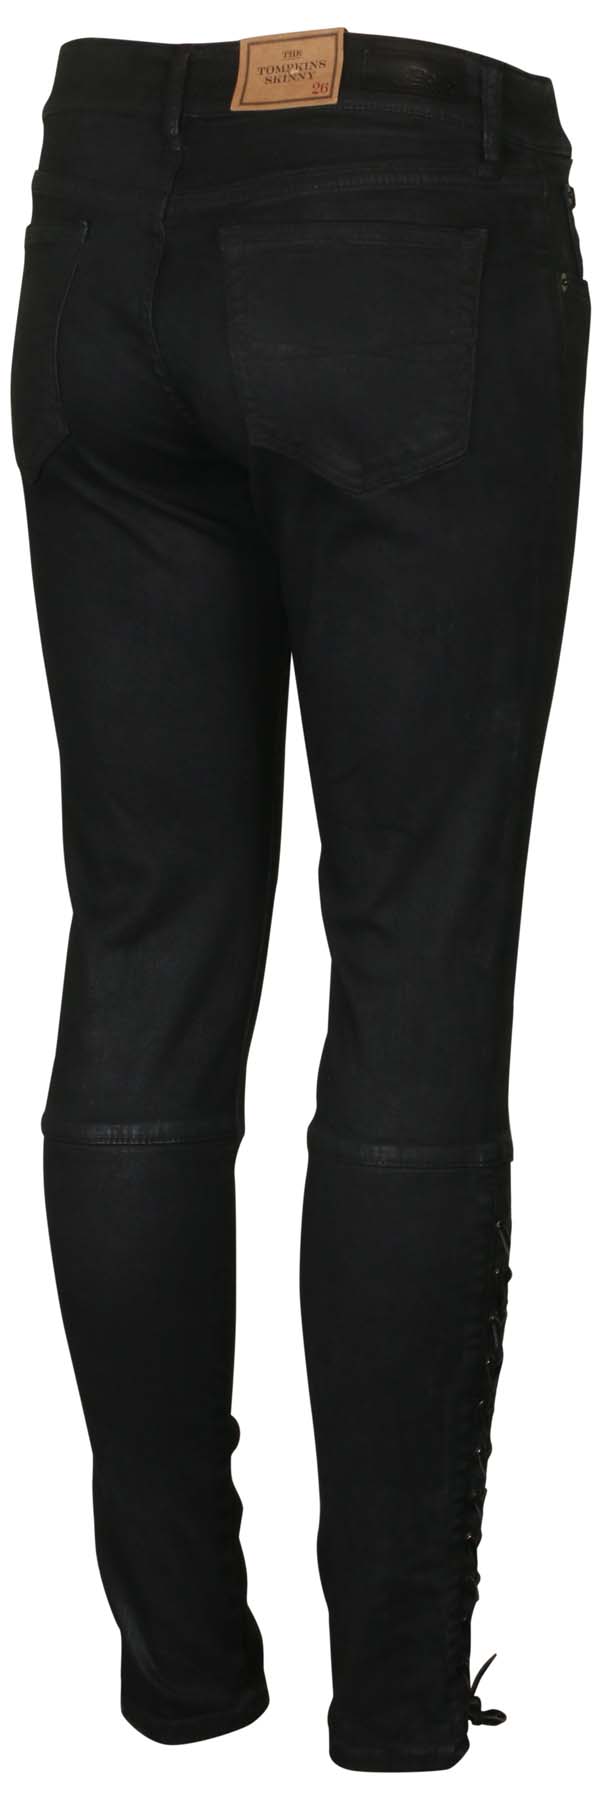 Polo RL Women's Lace Tomkins Skinny Denim Jeans - image 3 of 4